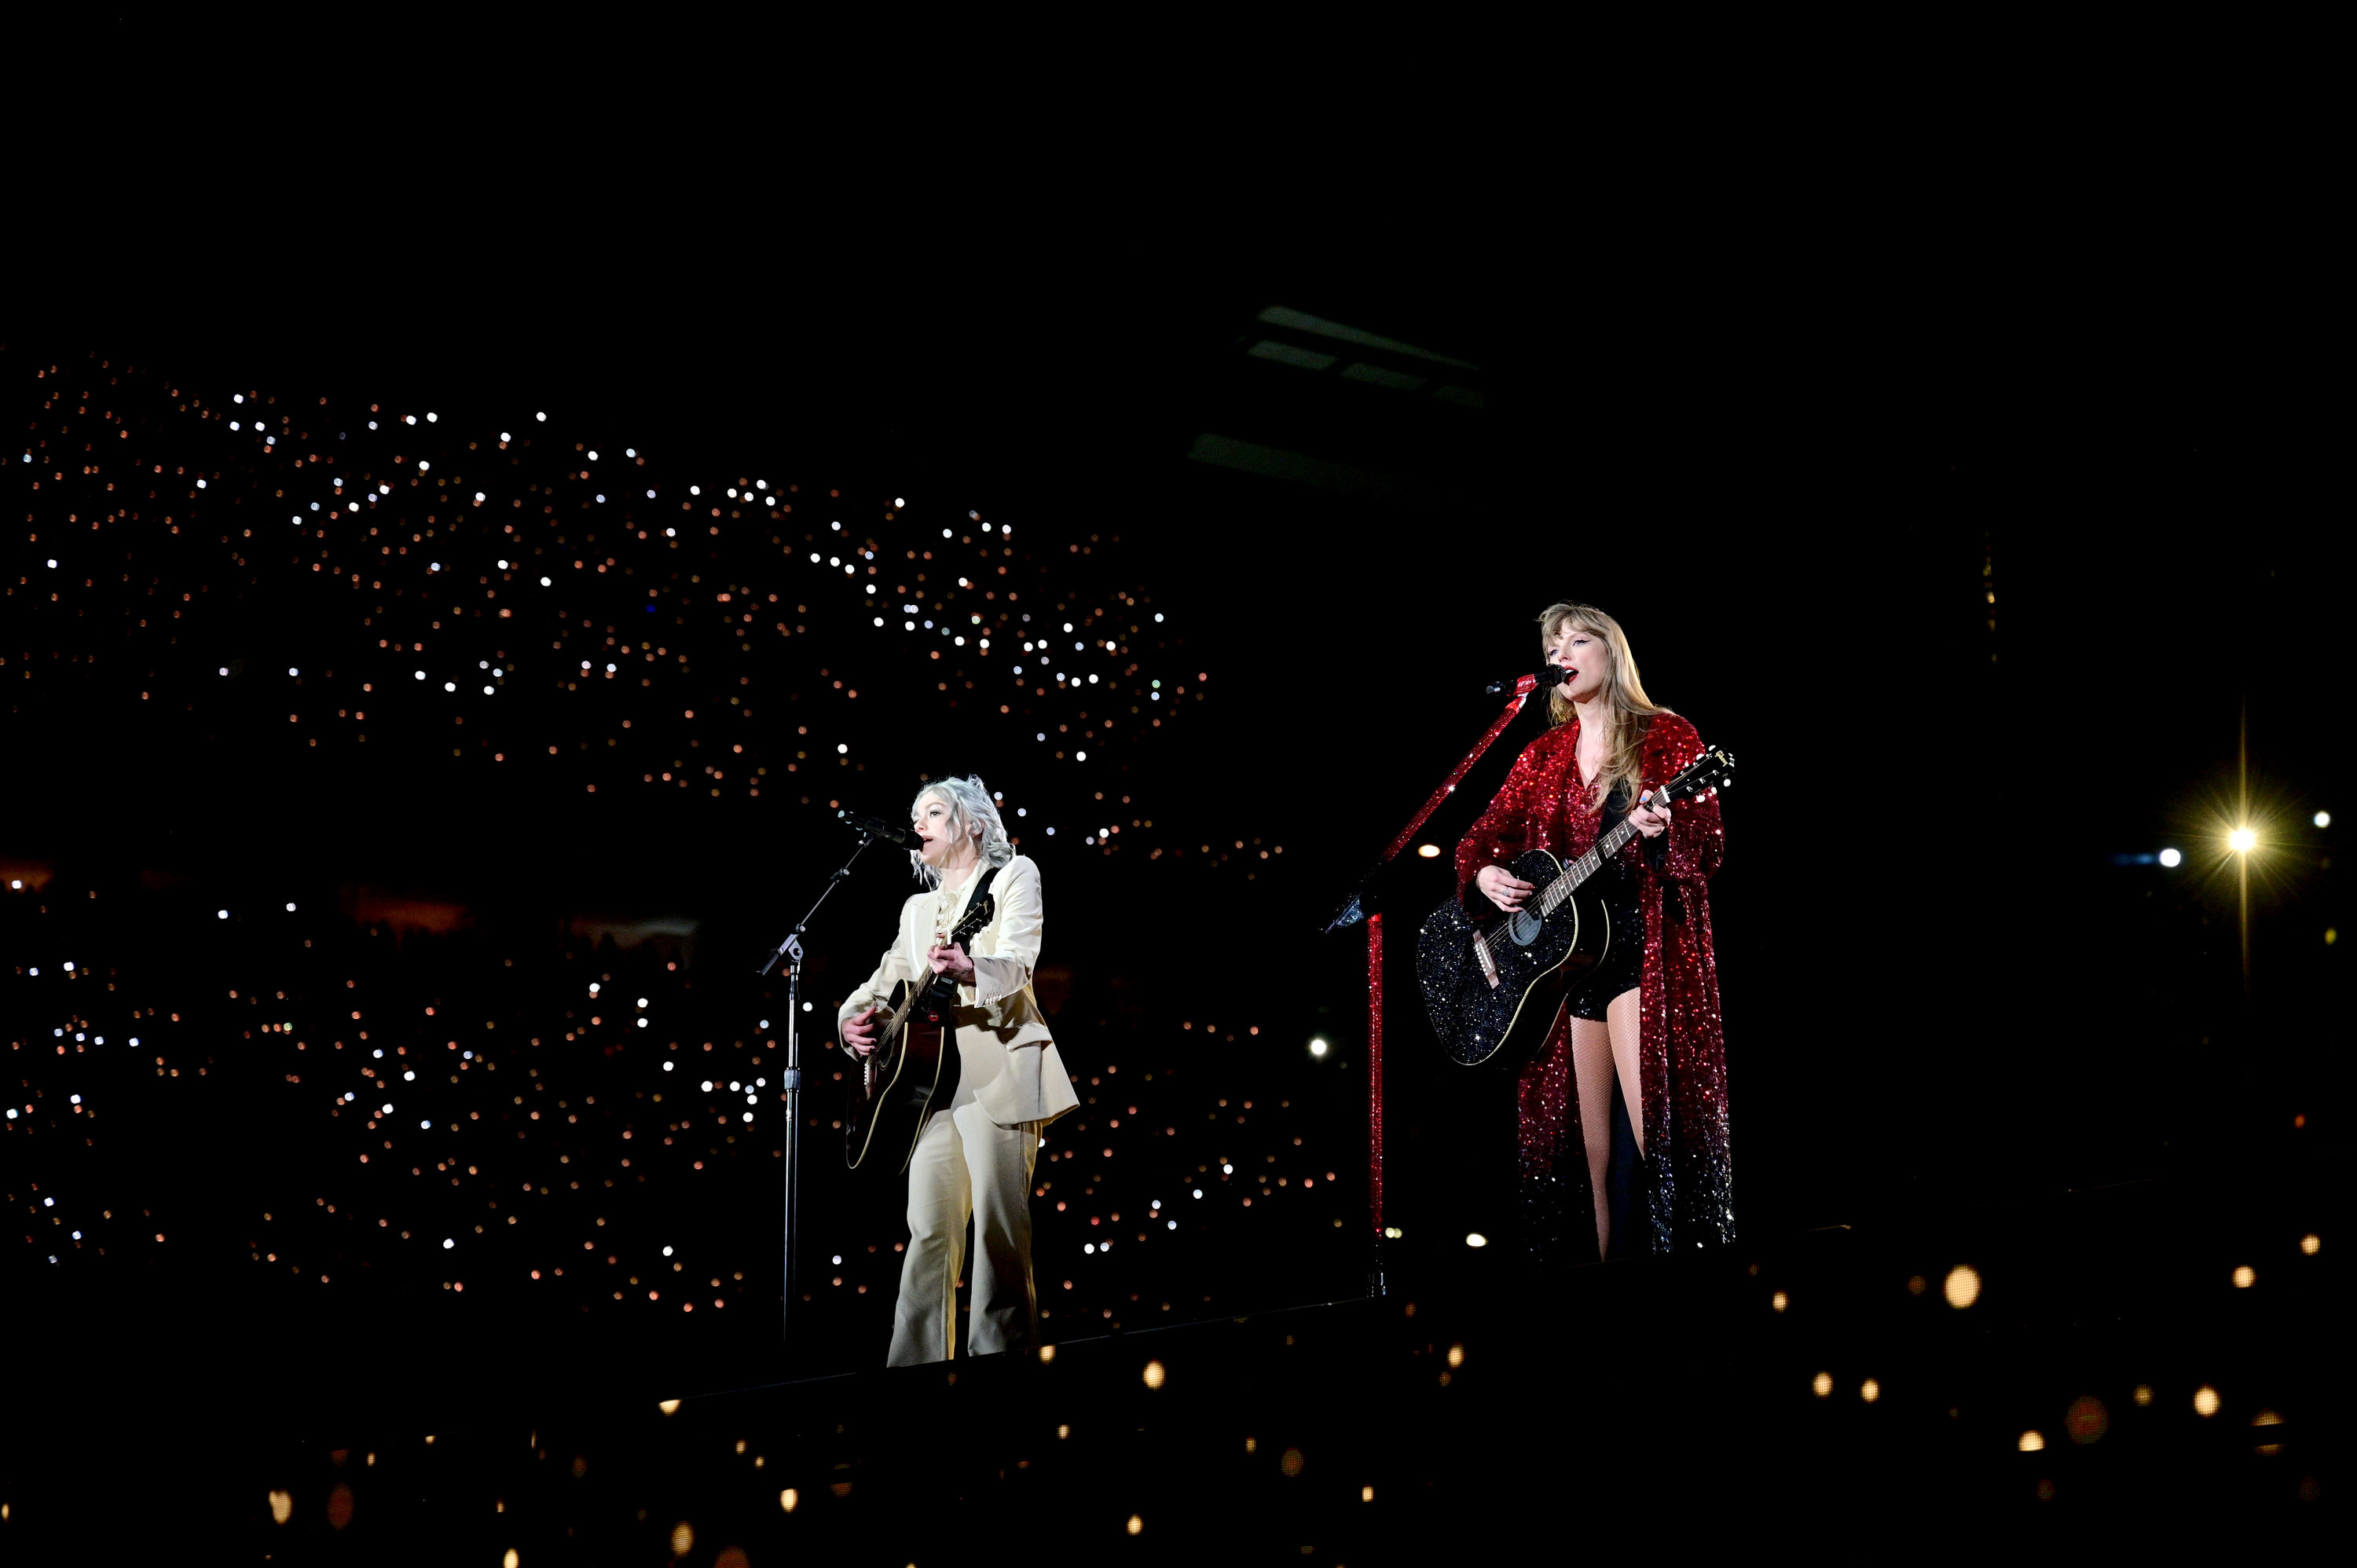 phoebe and taylor on stage